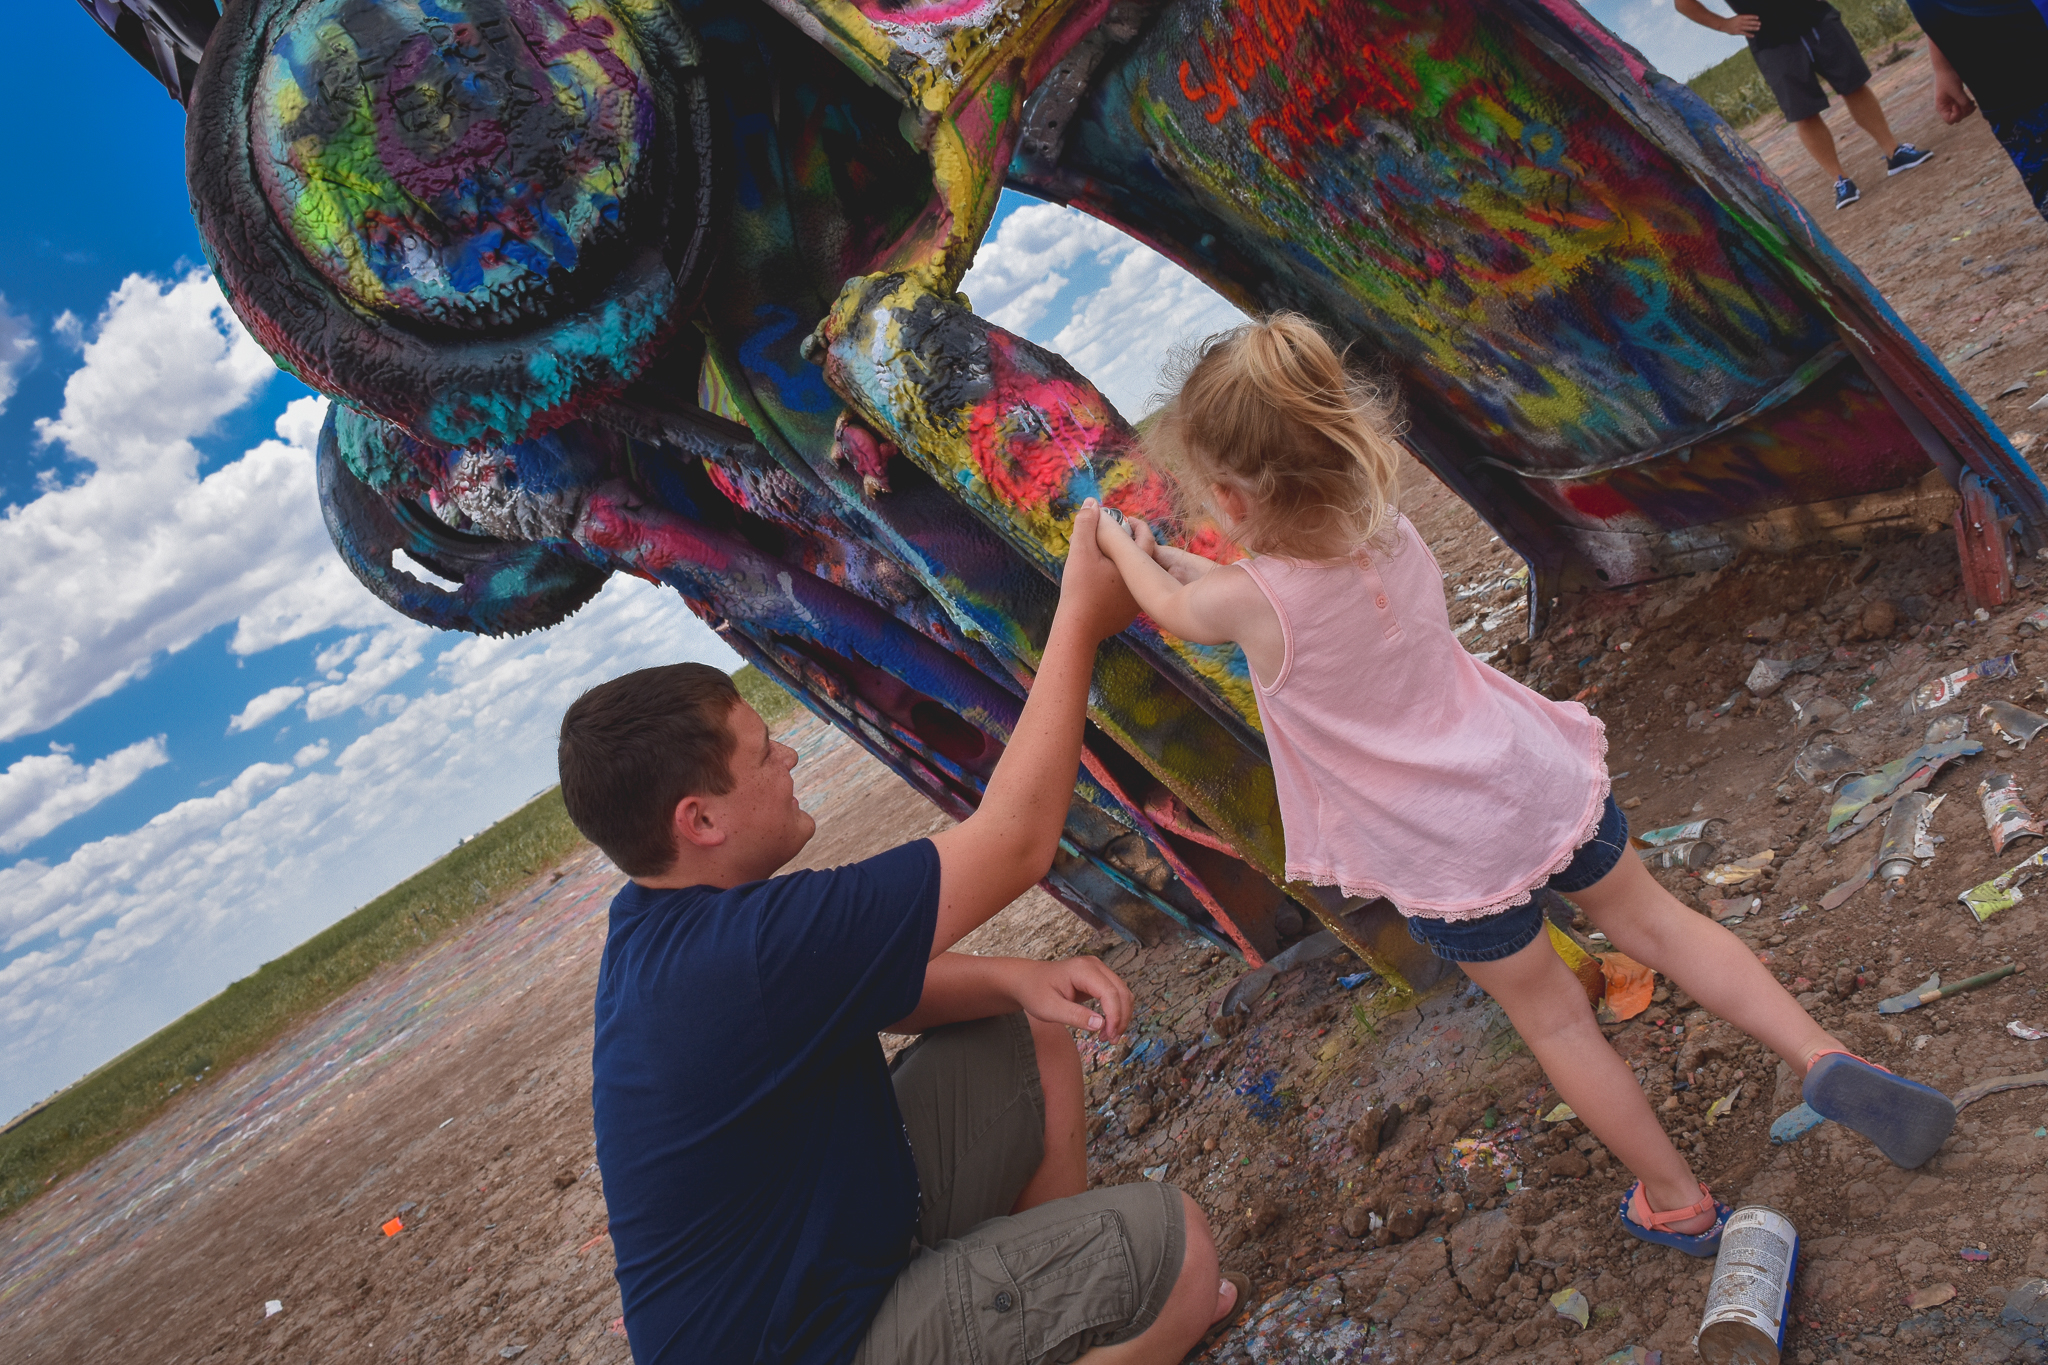 Teen boy and young girl spray painting a Cadillac